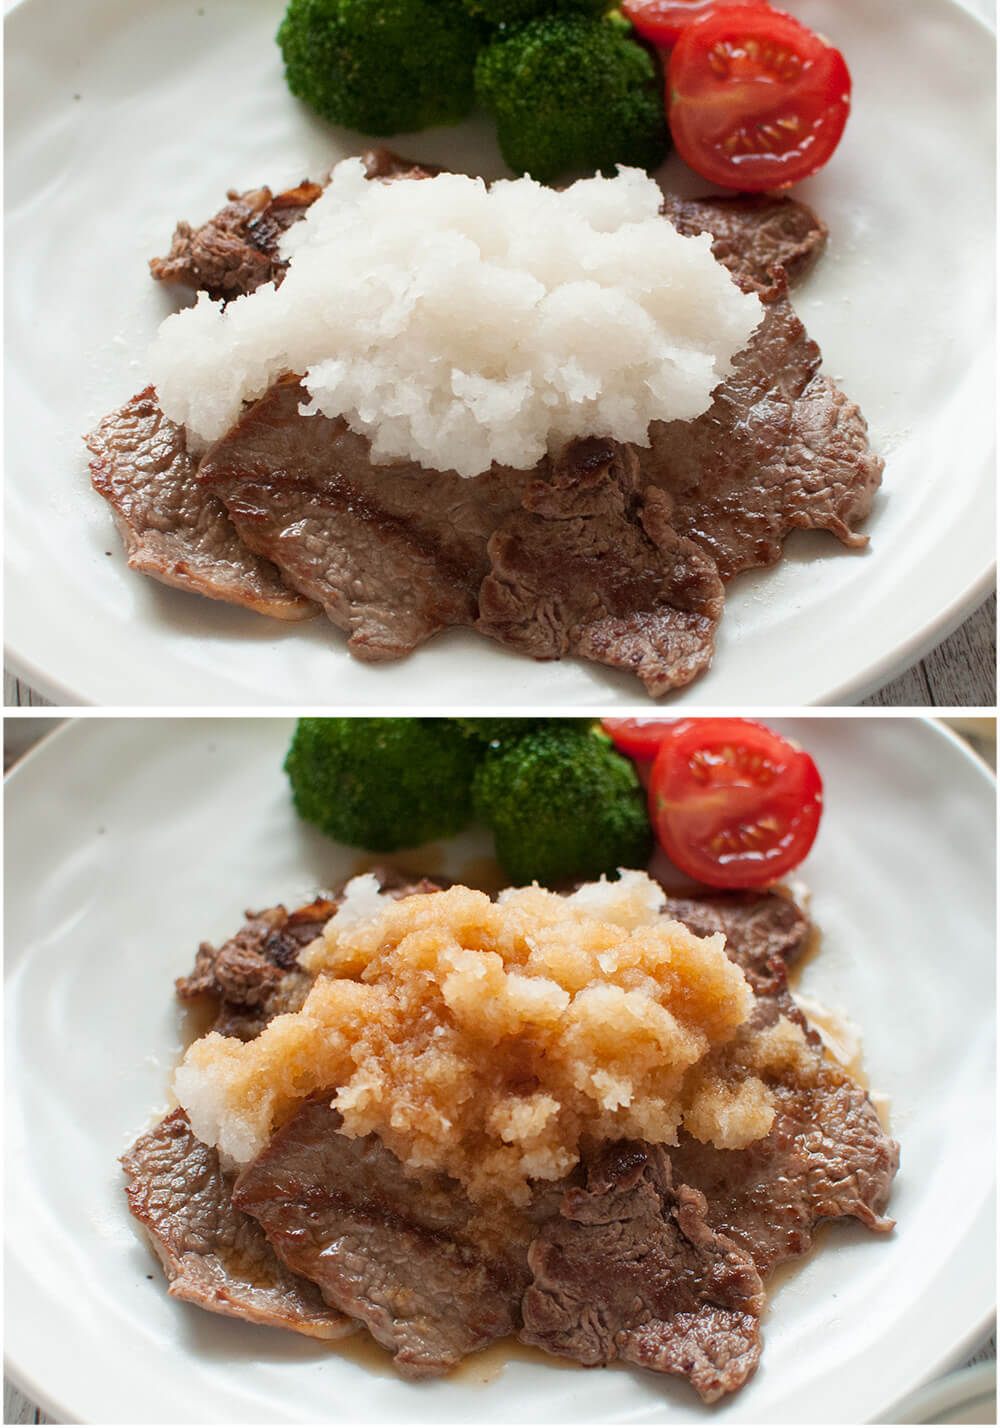 When sautéed beef slices are dressed with grated daikon and ponzu (citrus soy sauce) dressing, they become a rather light meal instead of a rich and heavy beef dish. Beef with Grated Daikon and Ponzu Dressing is so quick to make.